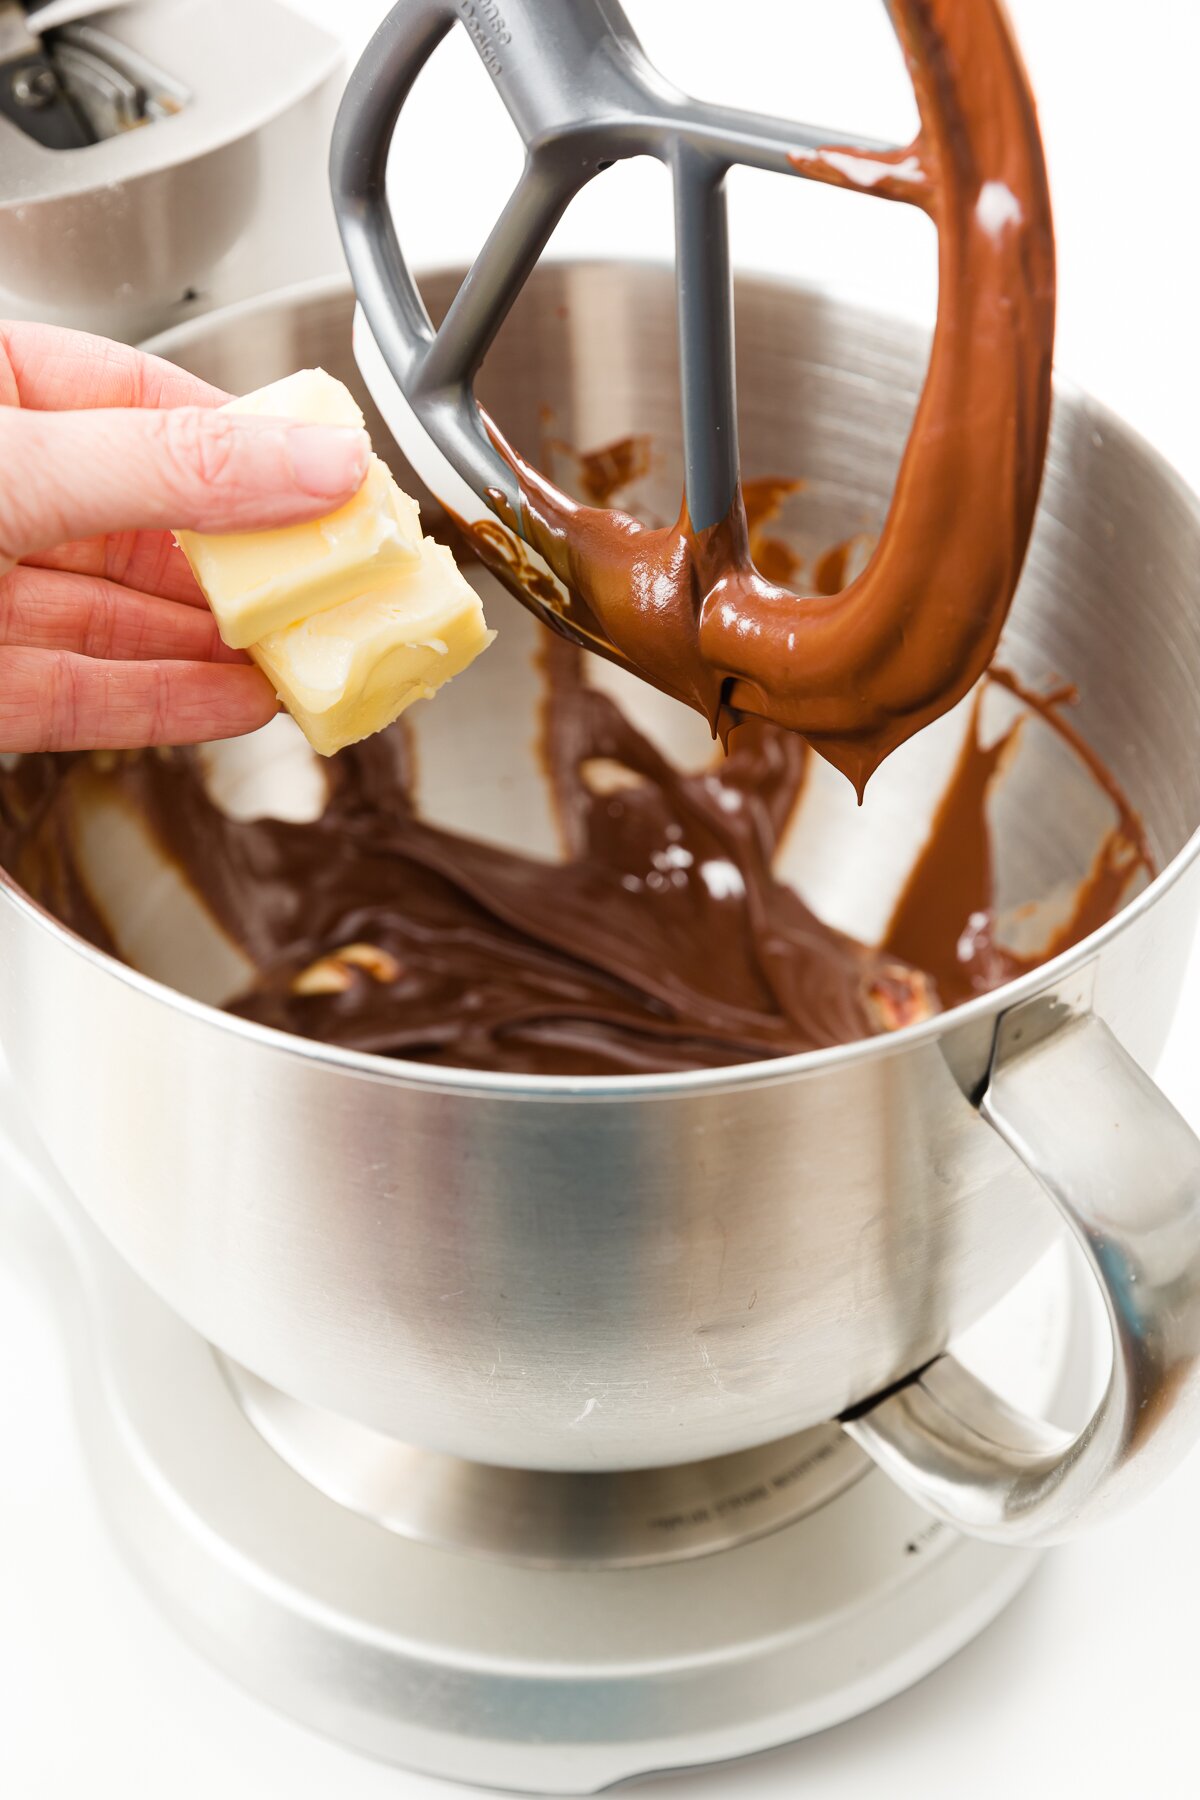 Hand dropping butter pieces into a stand mixer filled with chocolate with paddle lifted